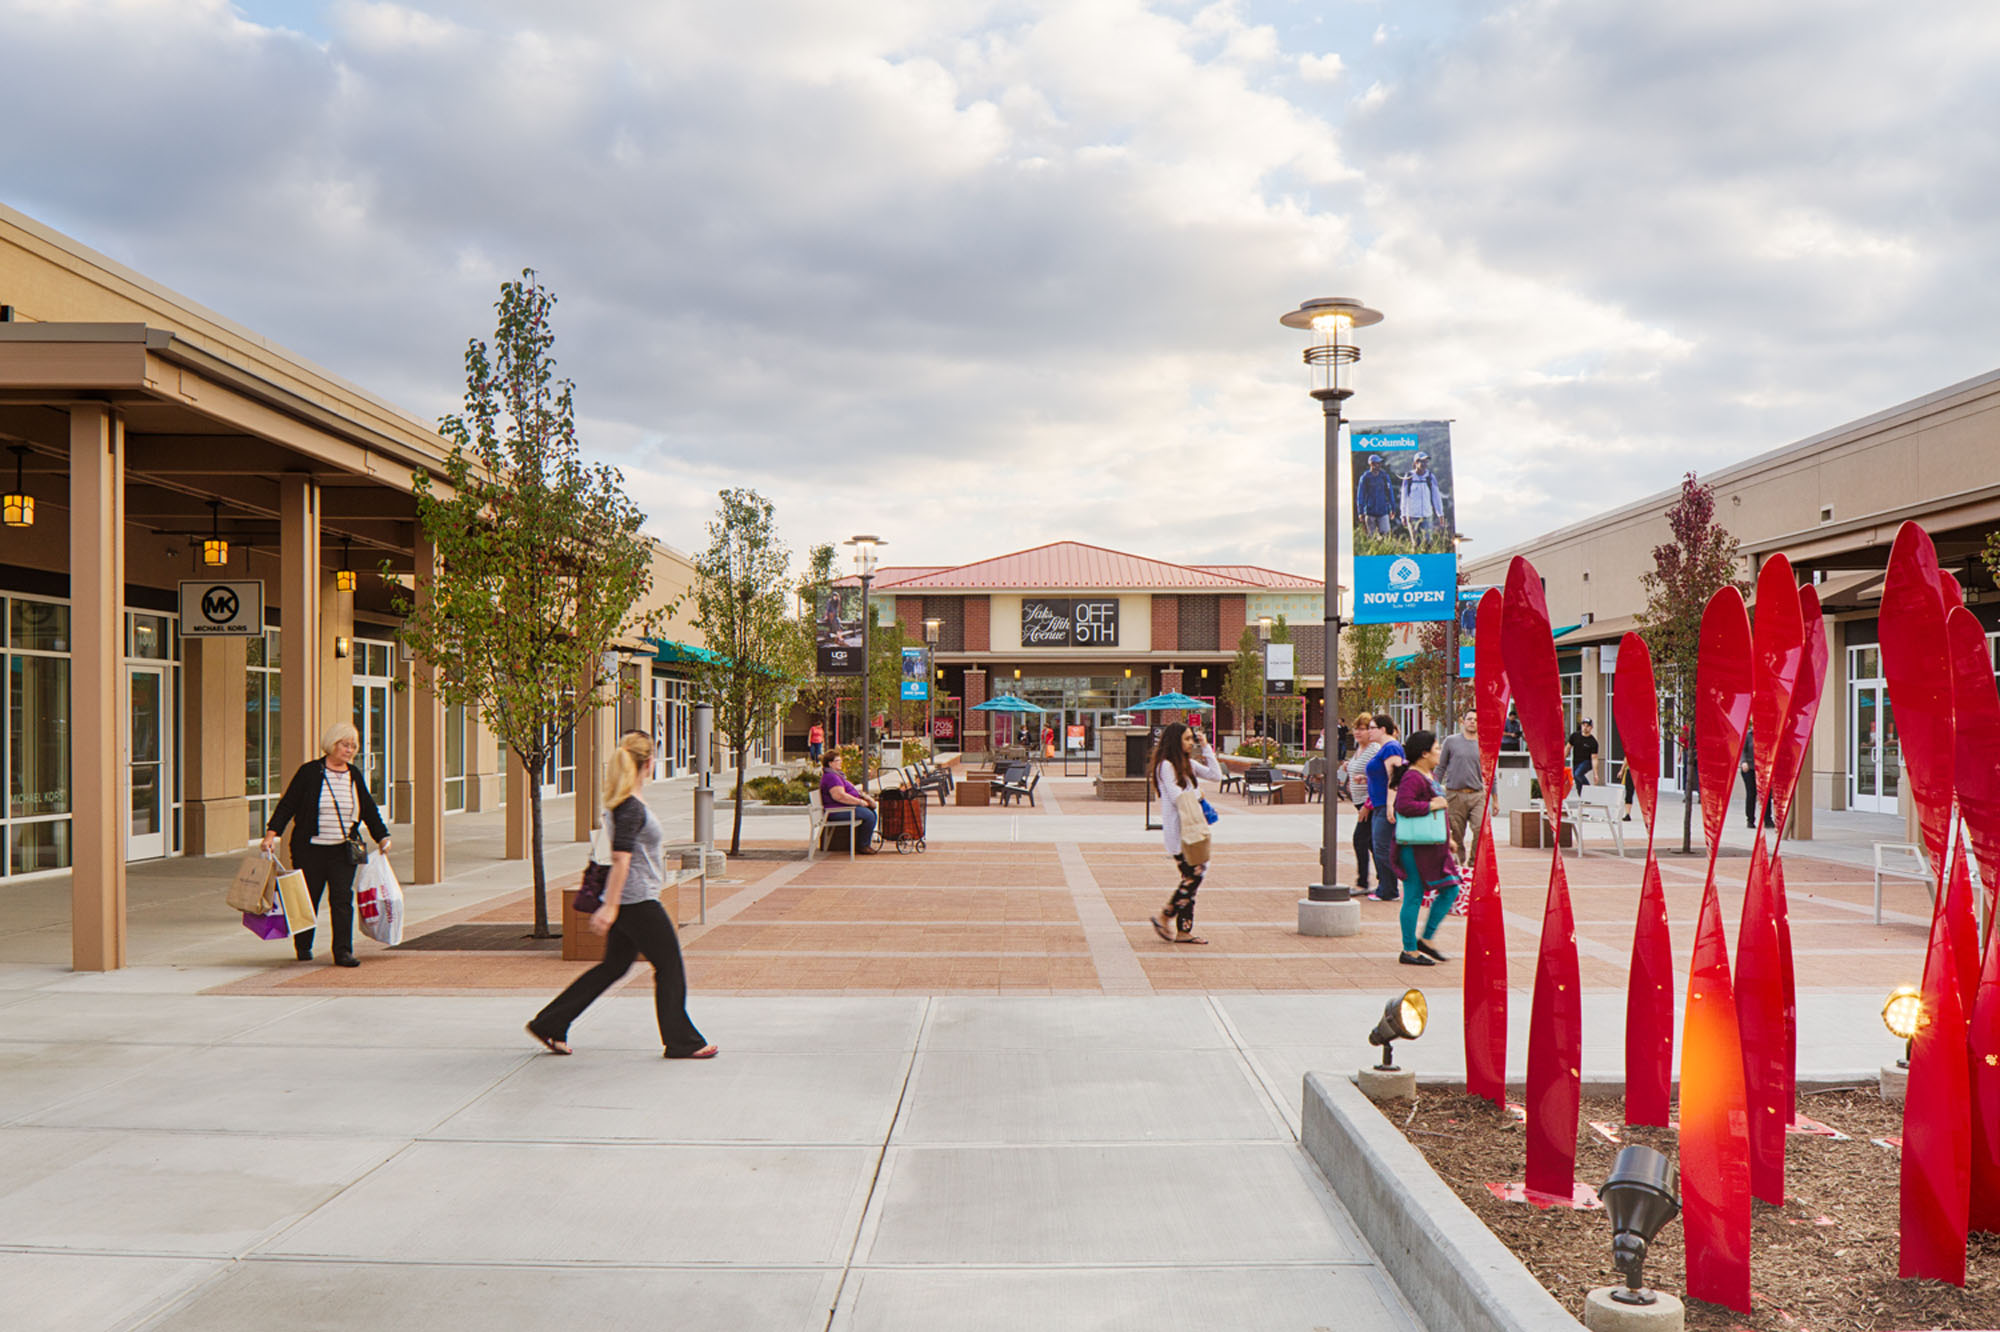 Chicago Premium Outlets - Outlet center in Chicago area, Illinois, USA 